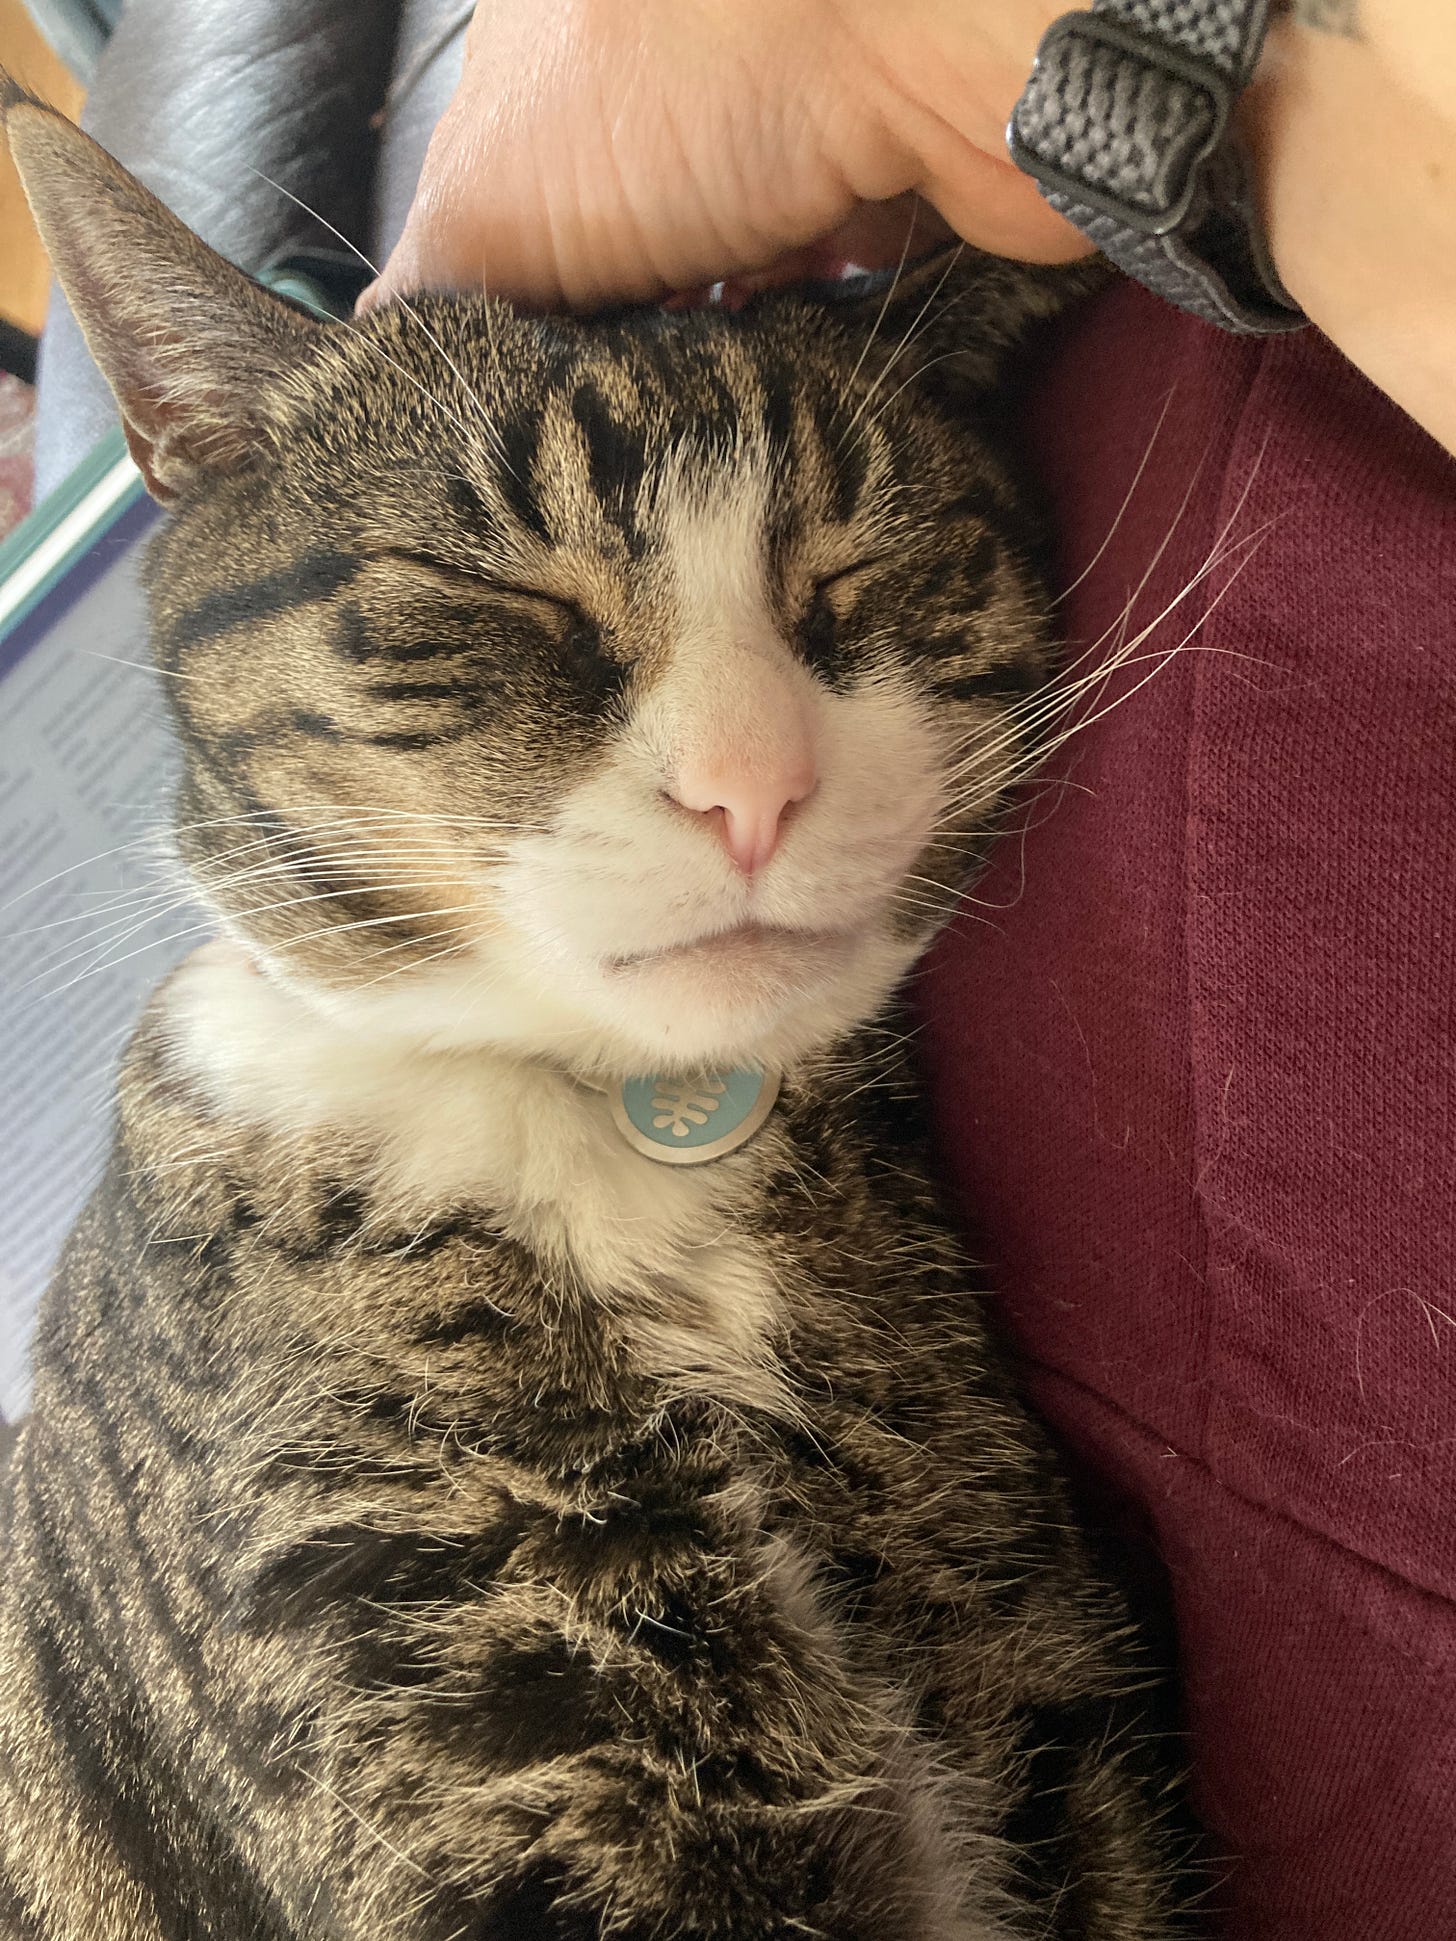 A tabby cat with white points sleeps on a person's lap